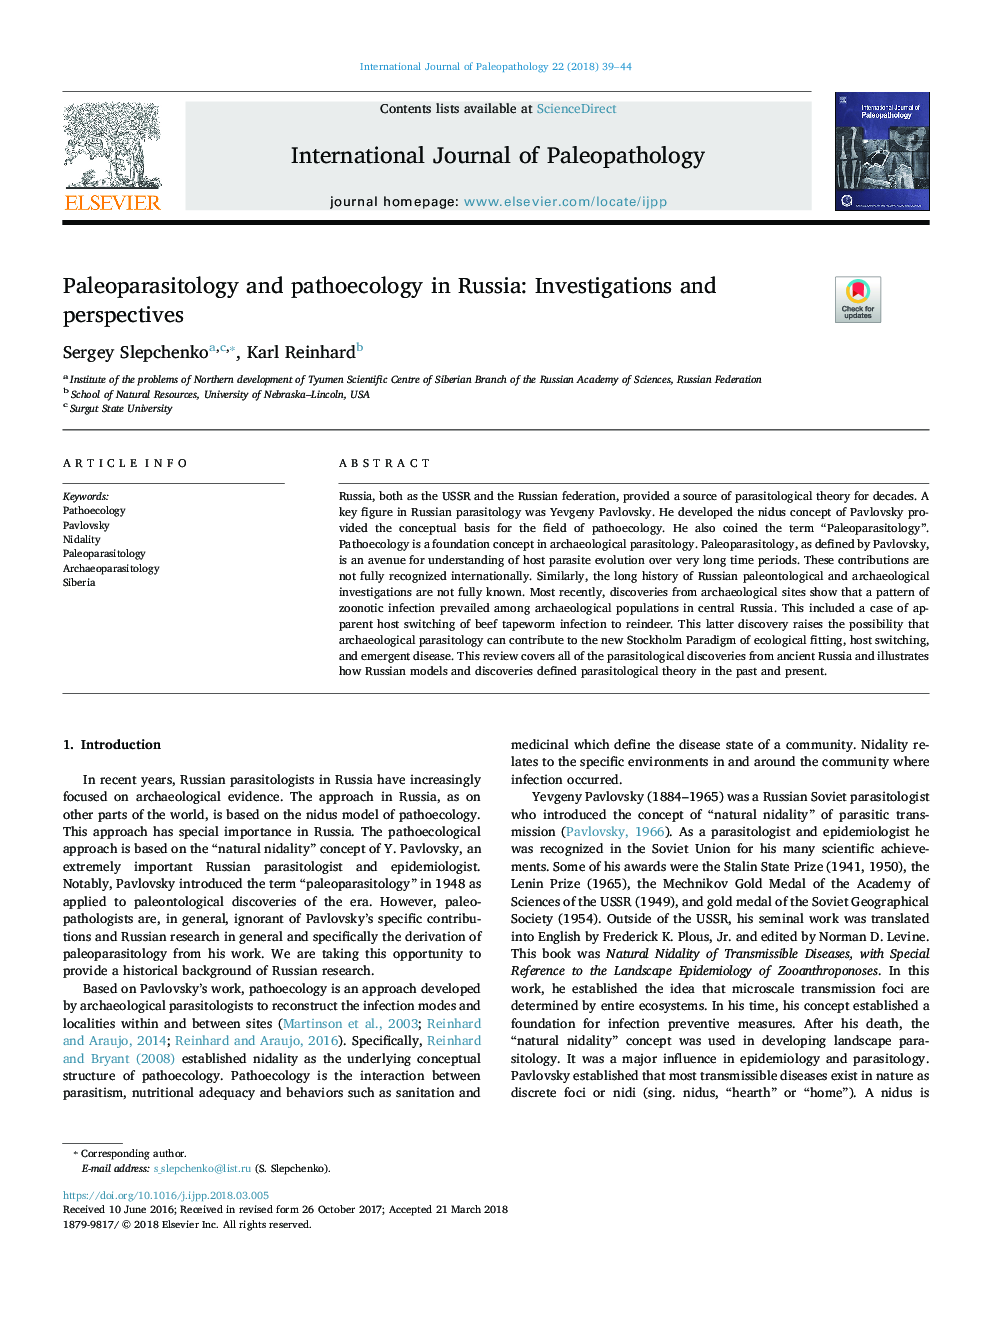 Paleoparasitology and pathoecology in Russia: Investigations and perspectives